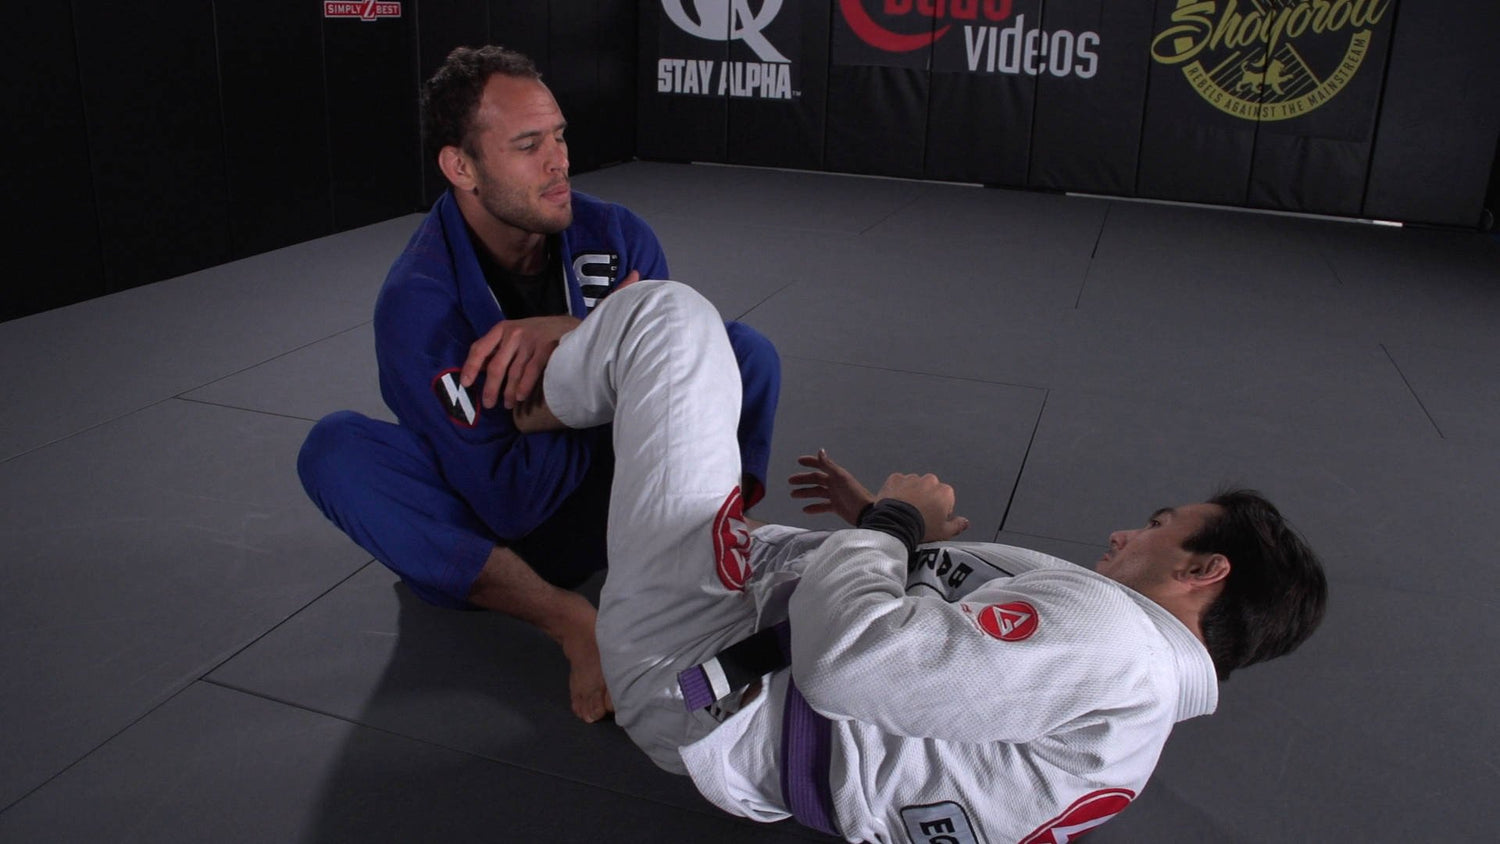 Taking a Look at the Estima Lock - Budo Jake Chats with Victor Estima